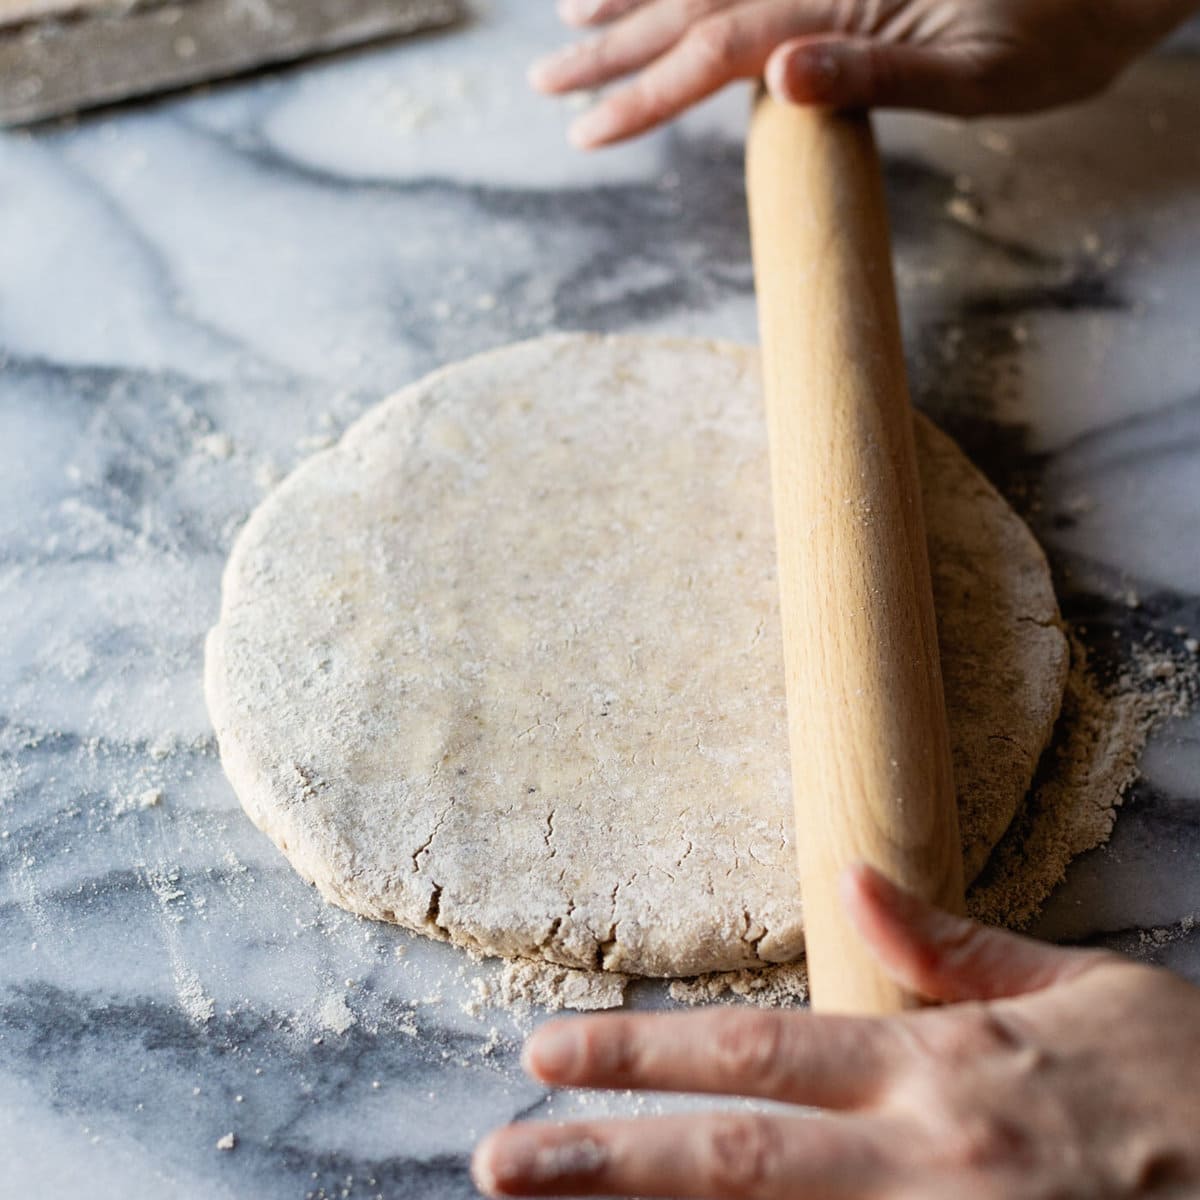 hands are rolling out the gf pie dough with a wood rolling pin